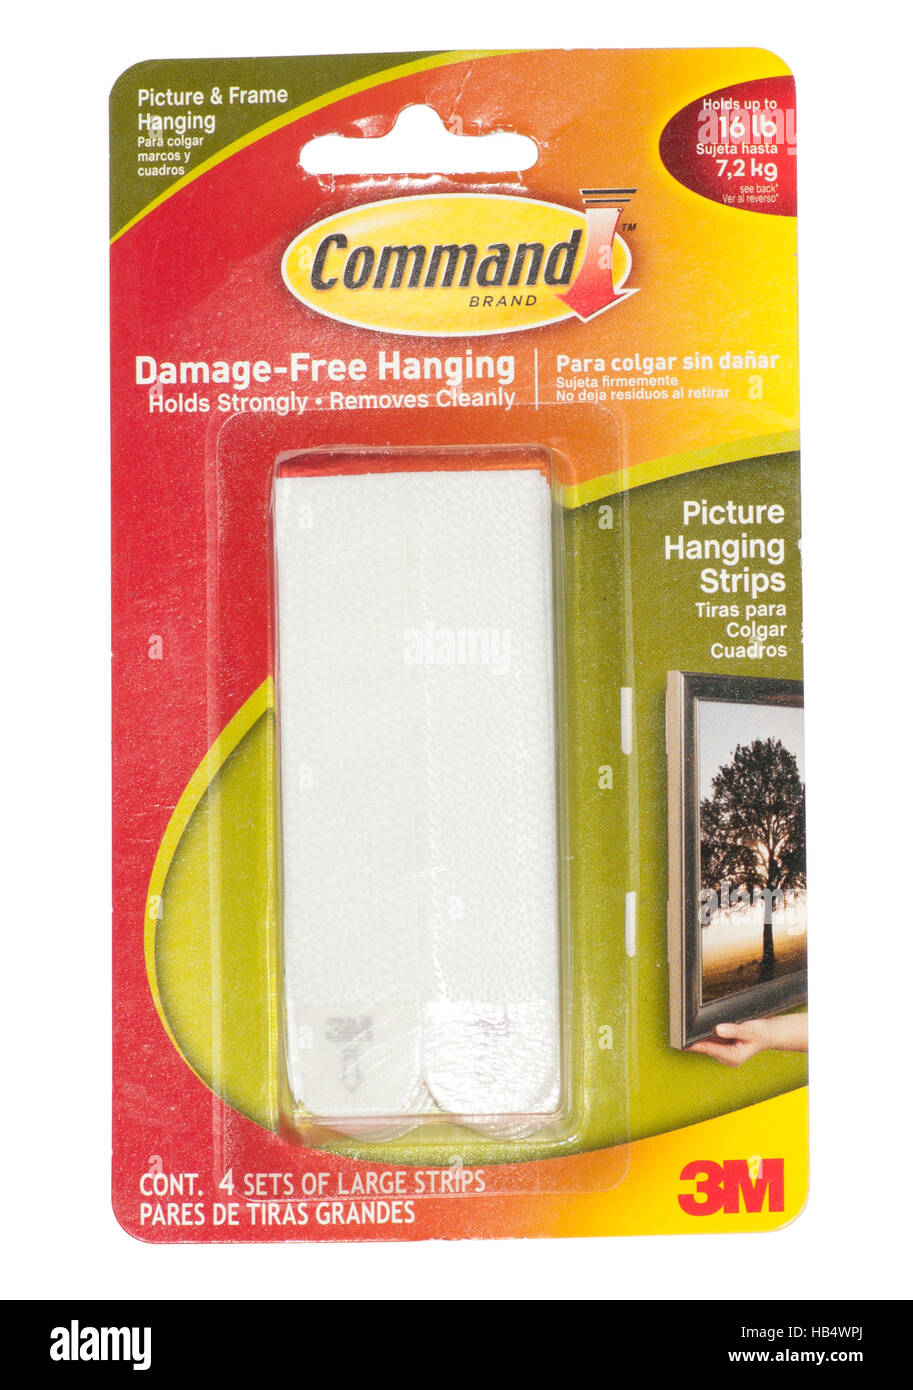 Pack Of Command Picture Hanging Strips Stock Photo